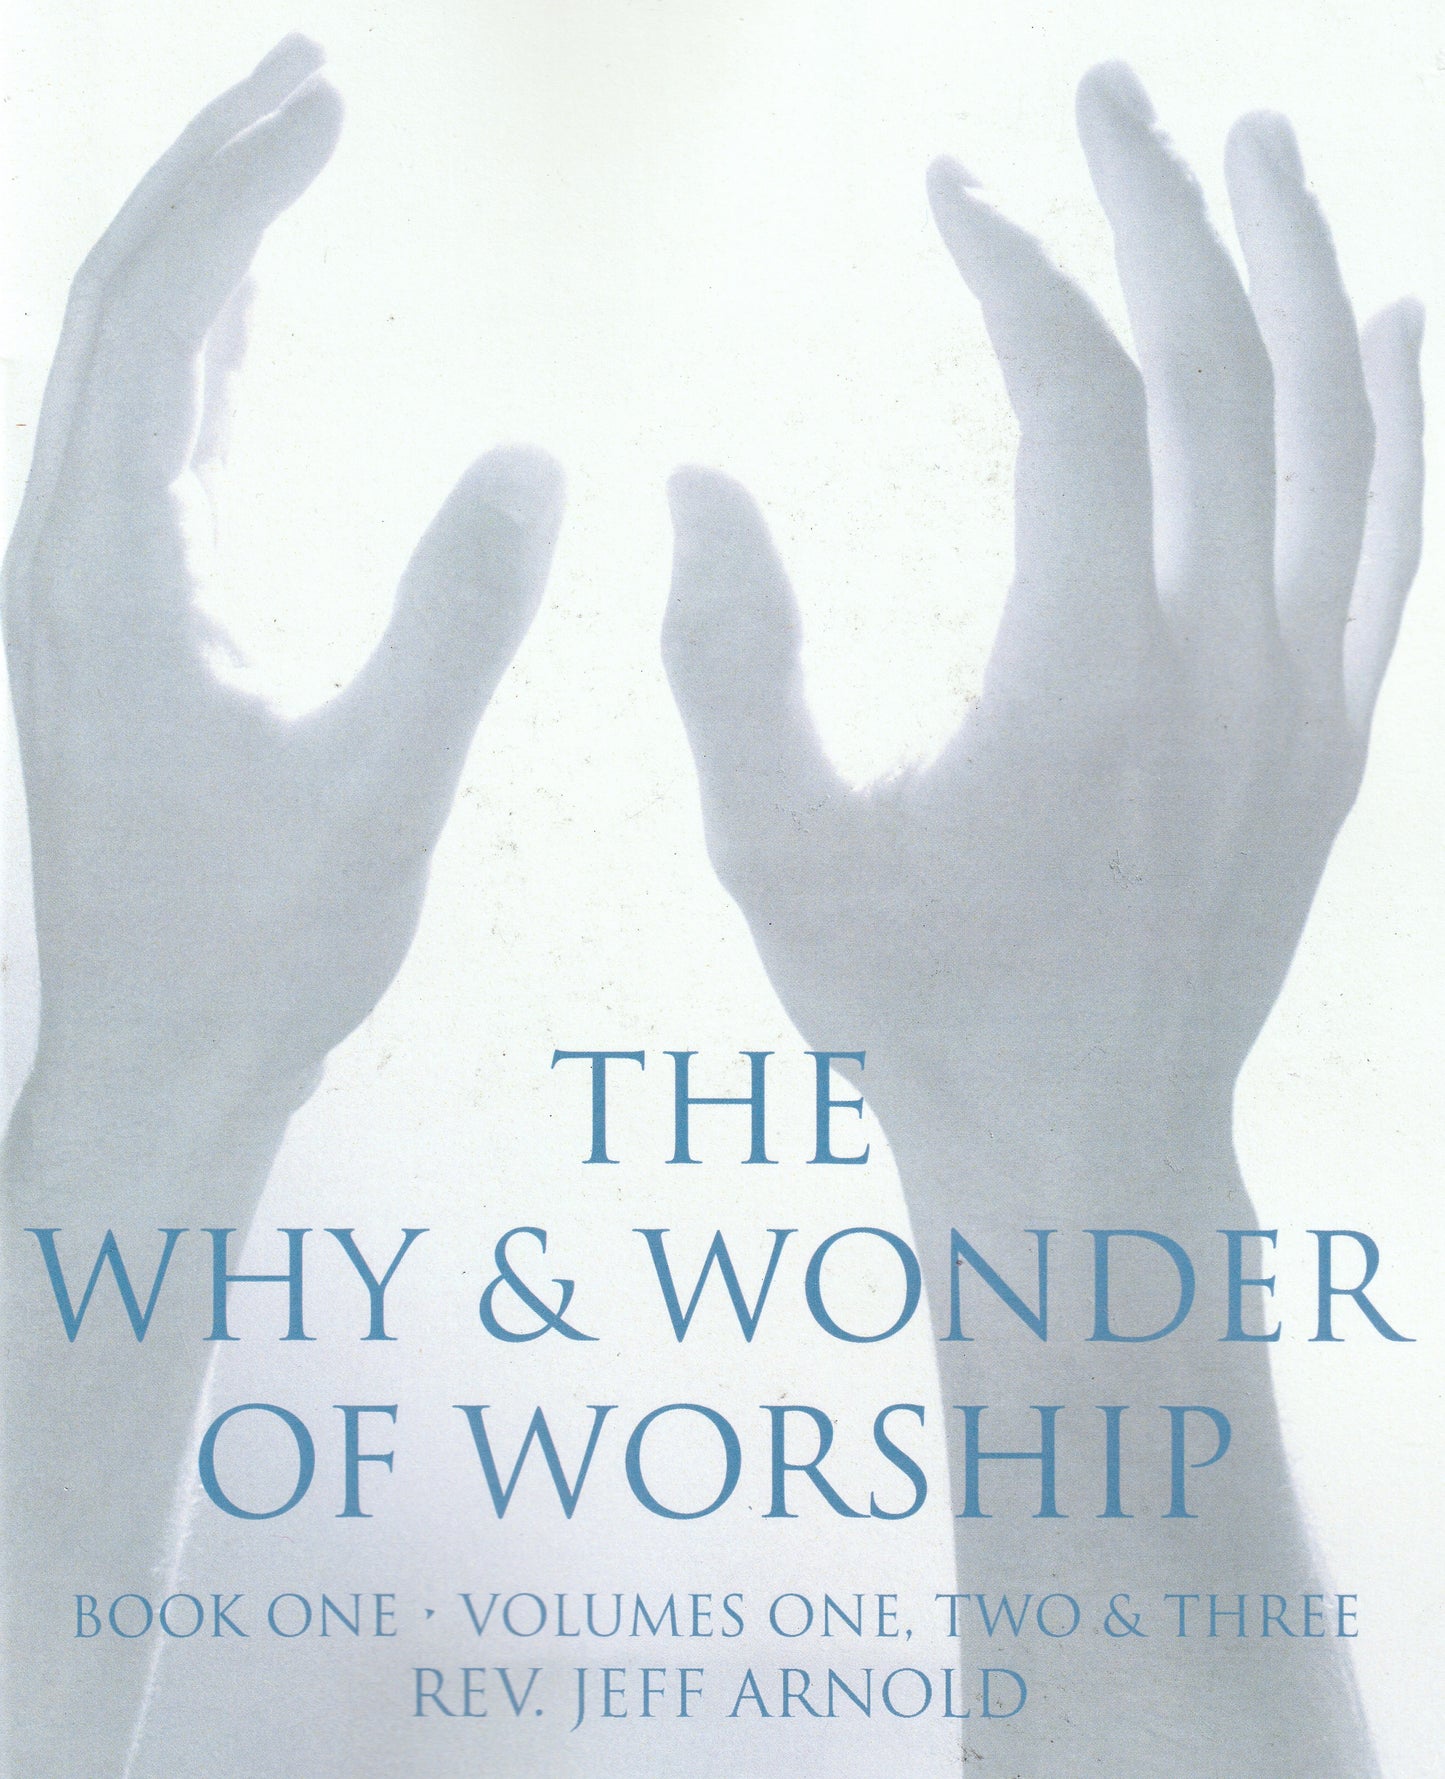 The Why & Wonder of Worship - Complete Set - Book One & Book Two (The Final Series) - SALE  $39.00